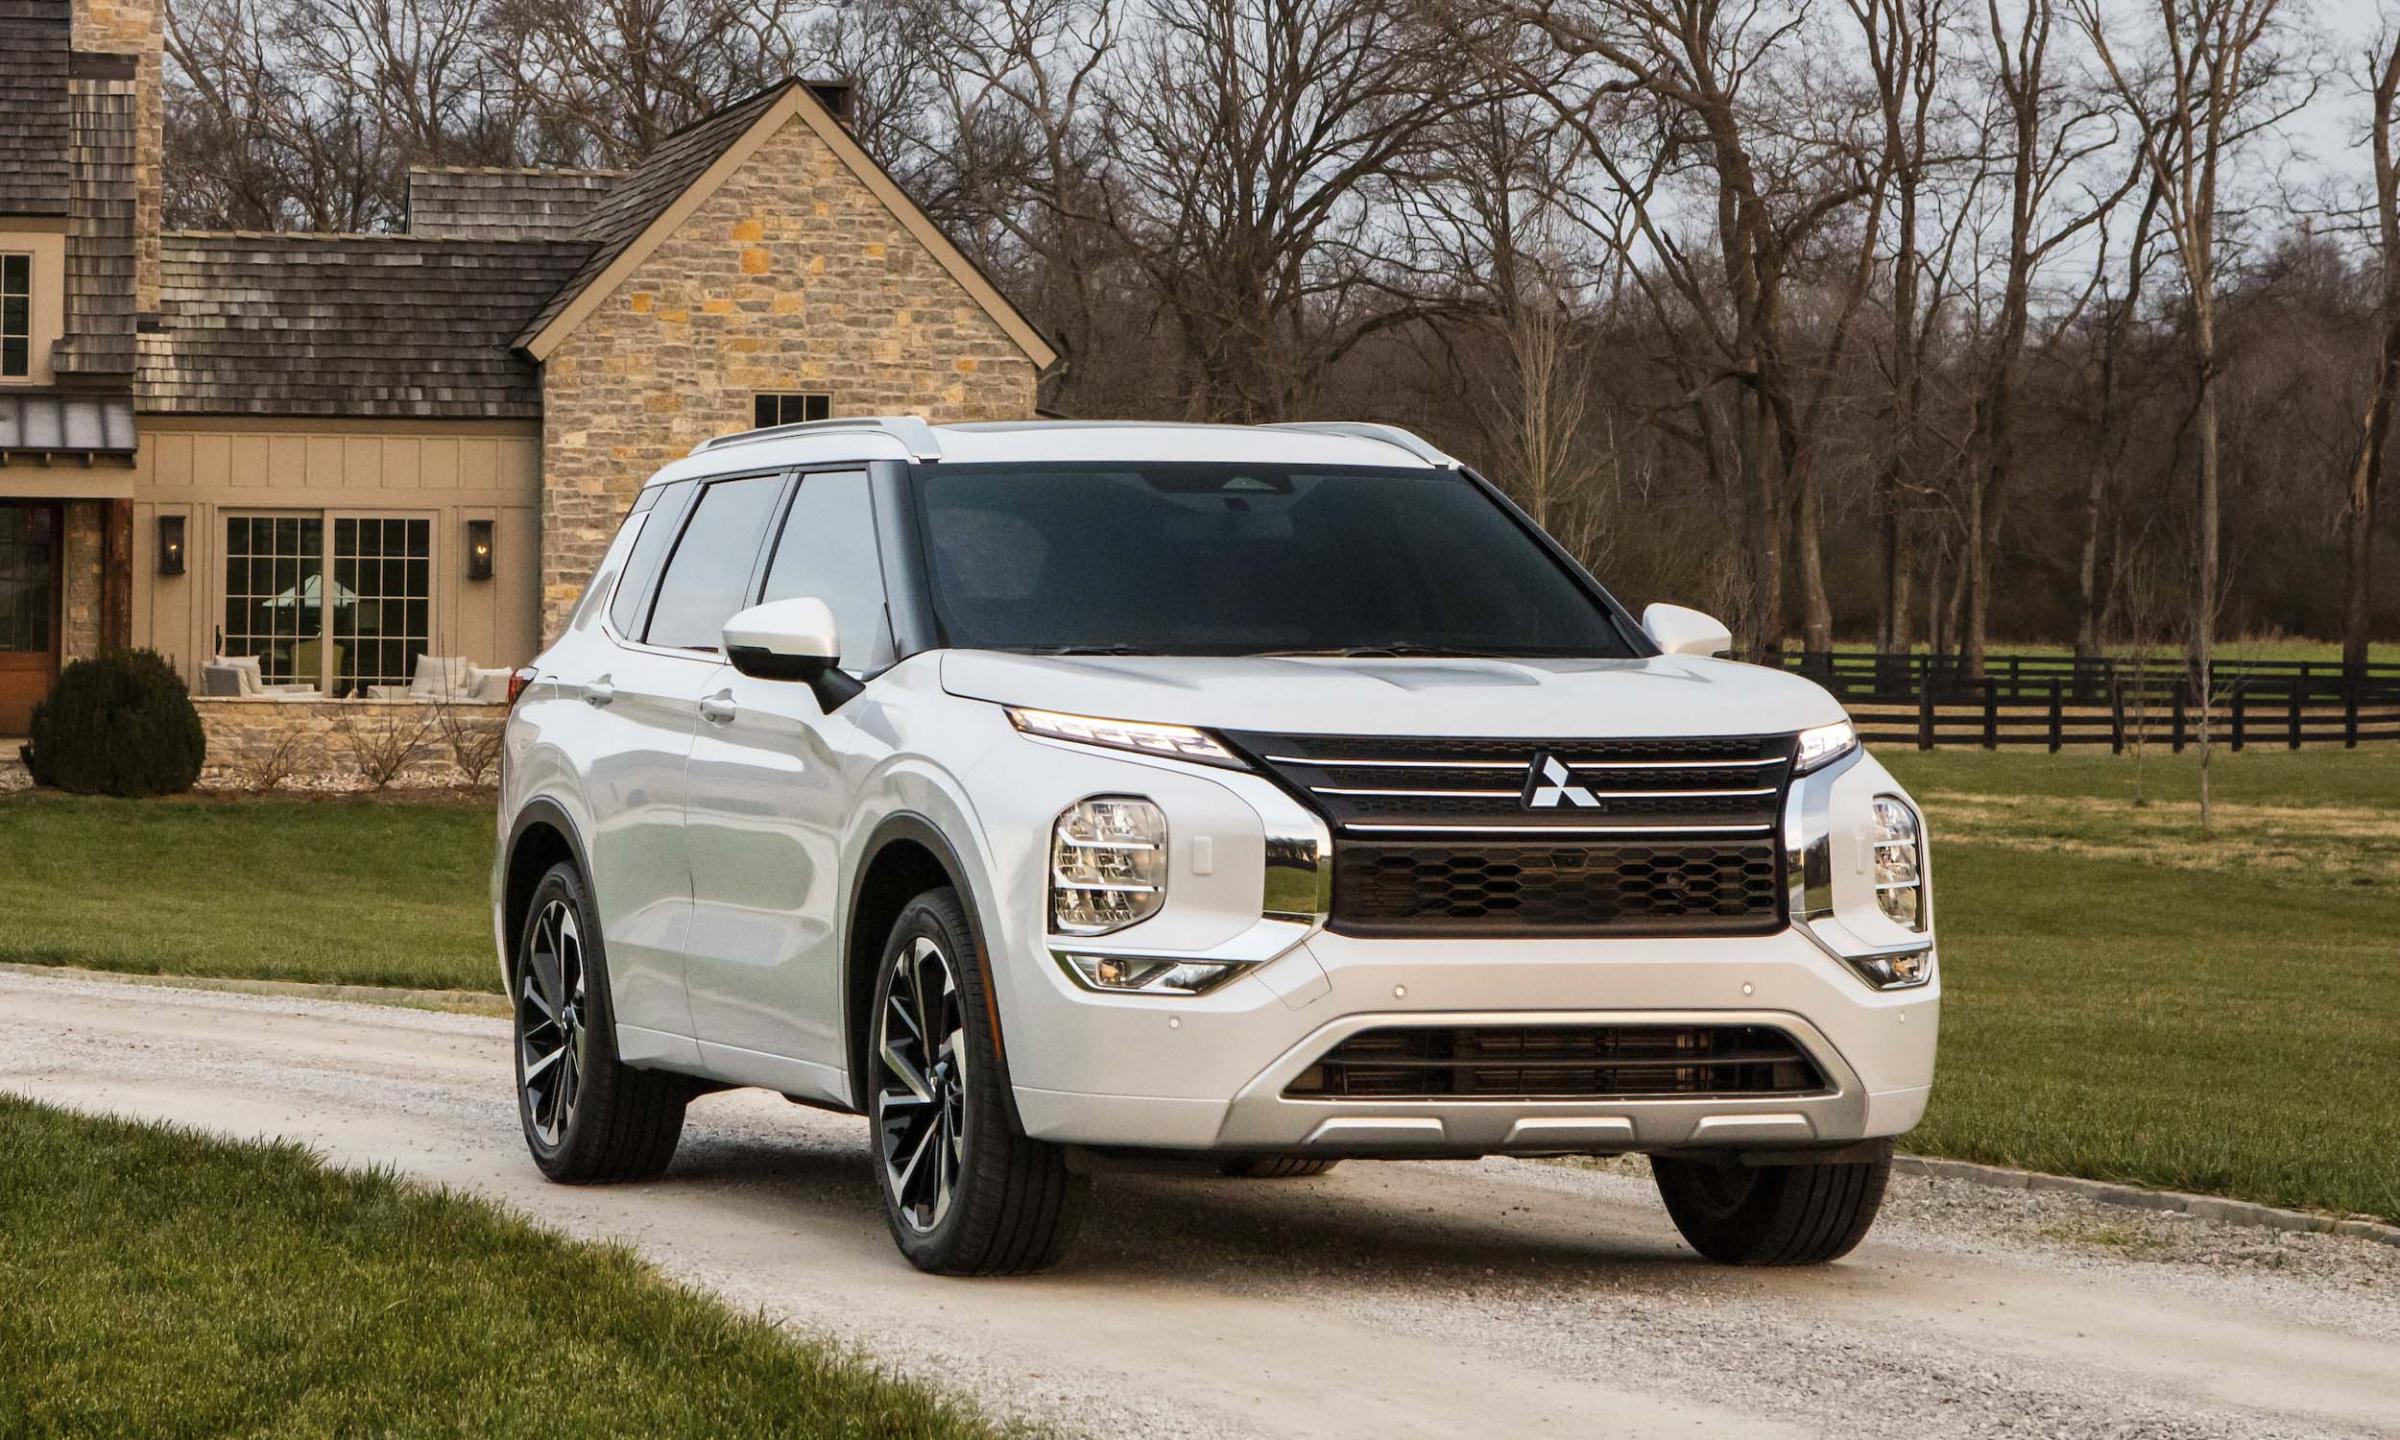 Image of Mitsubishi 2022 Outlander in front of a country-style house